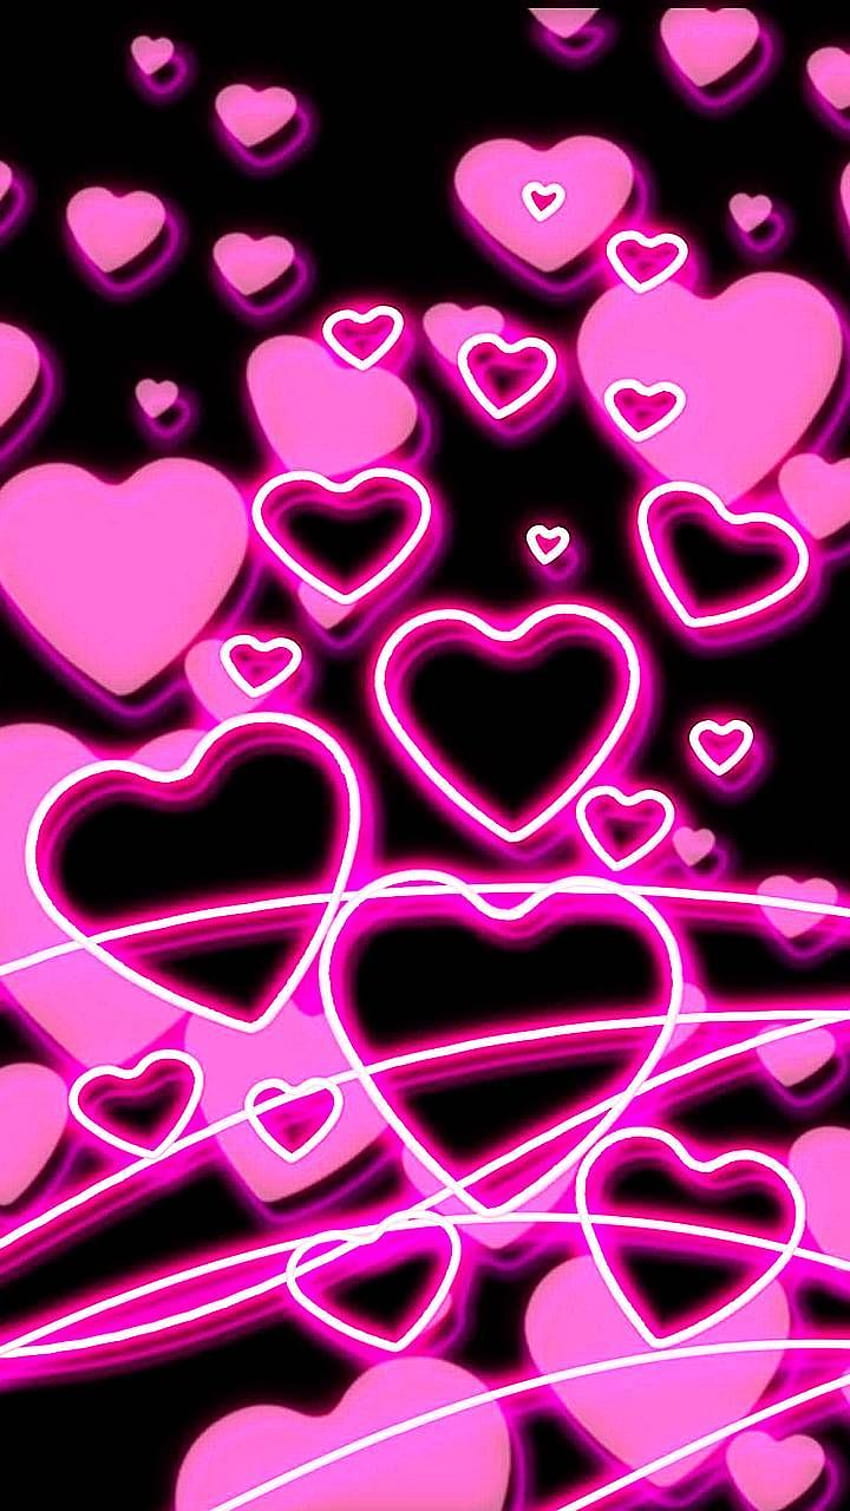 Neon hearts by a123k - 87 now. Browse millions of popular black an ...